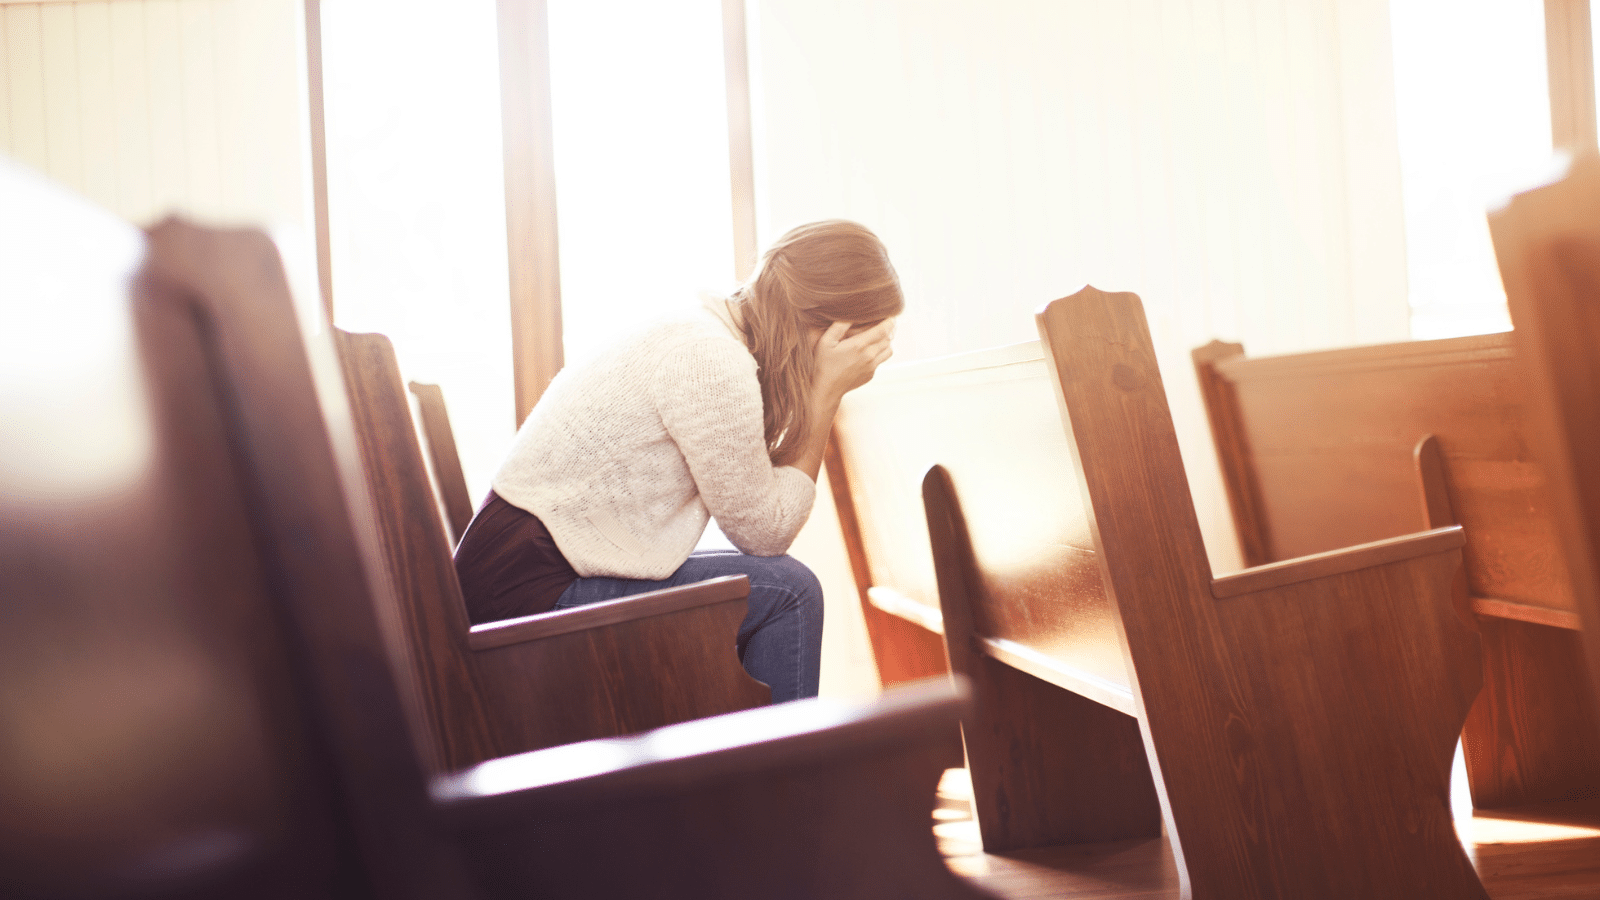 Woman with hands covering her face in church